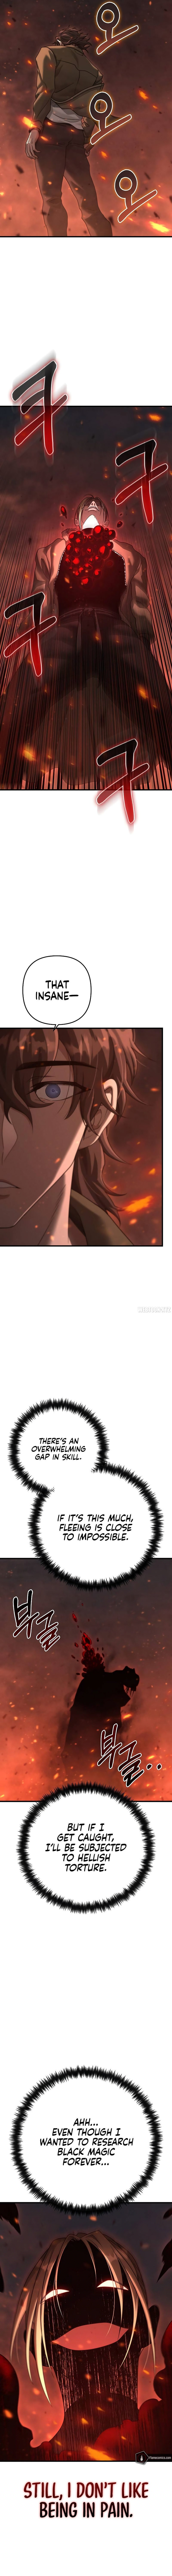 foreigner-on-the-periphery-chap-30-15